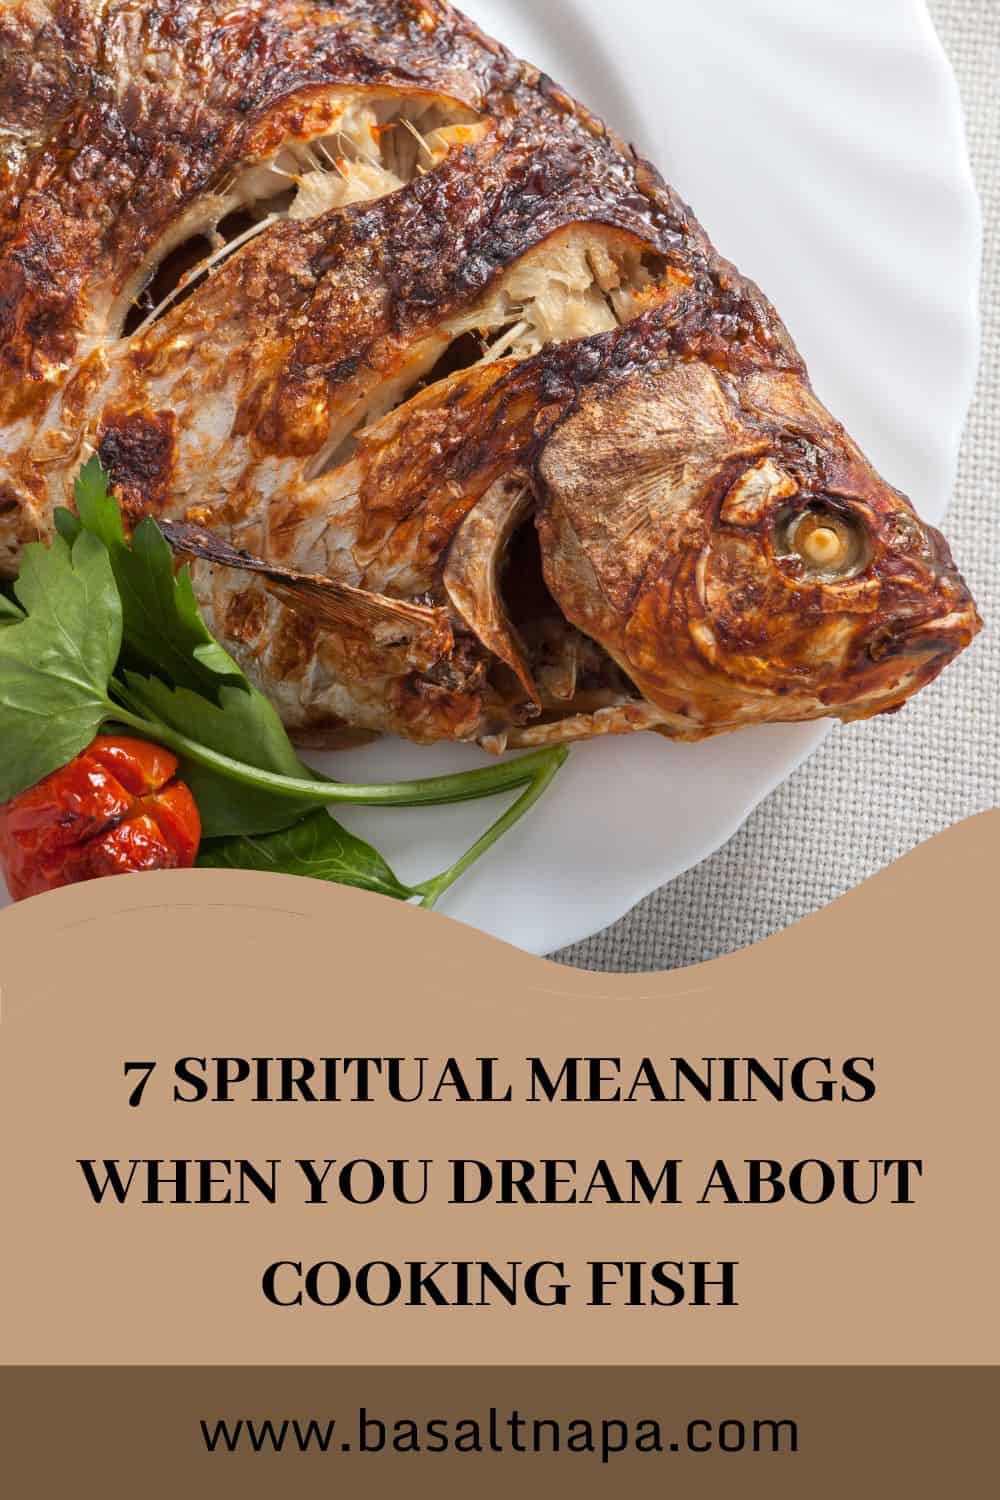 7 meanings of dreaming about cooking fish